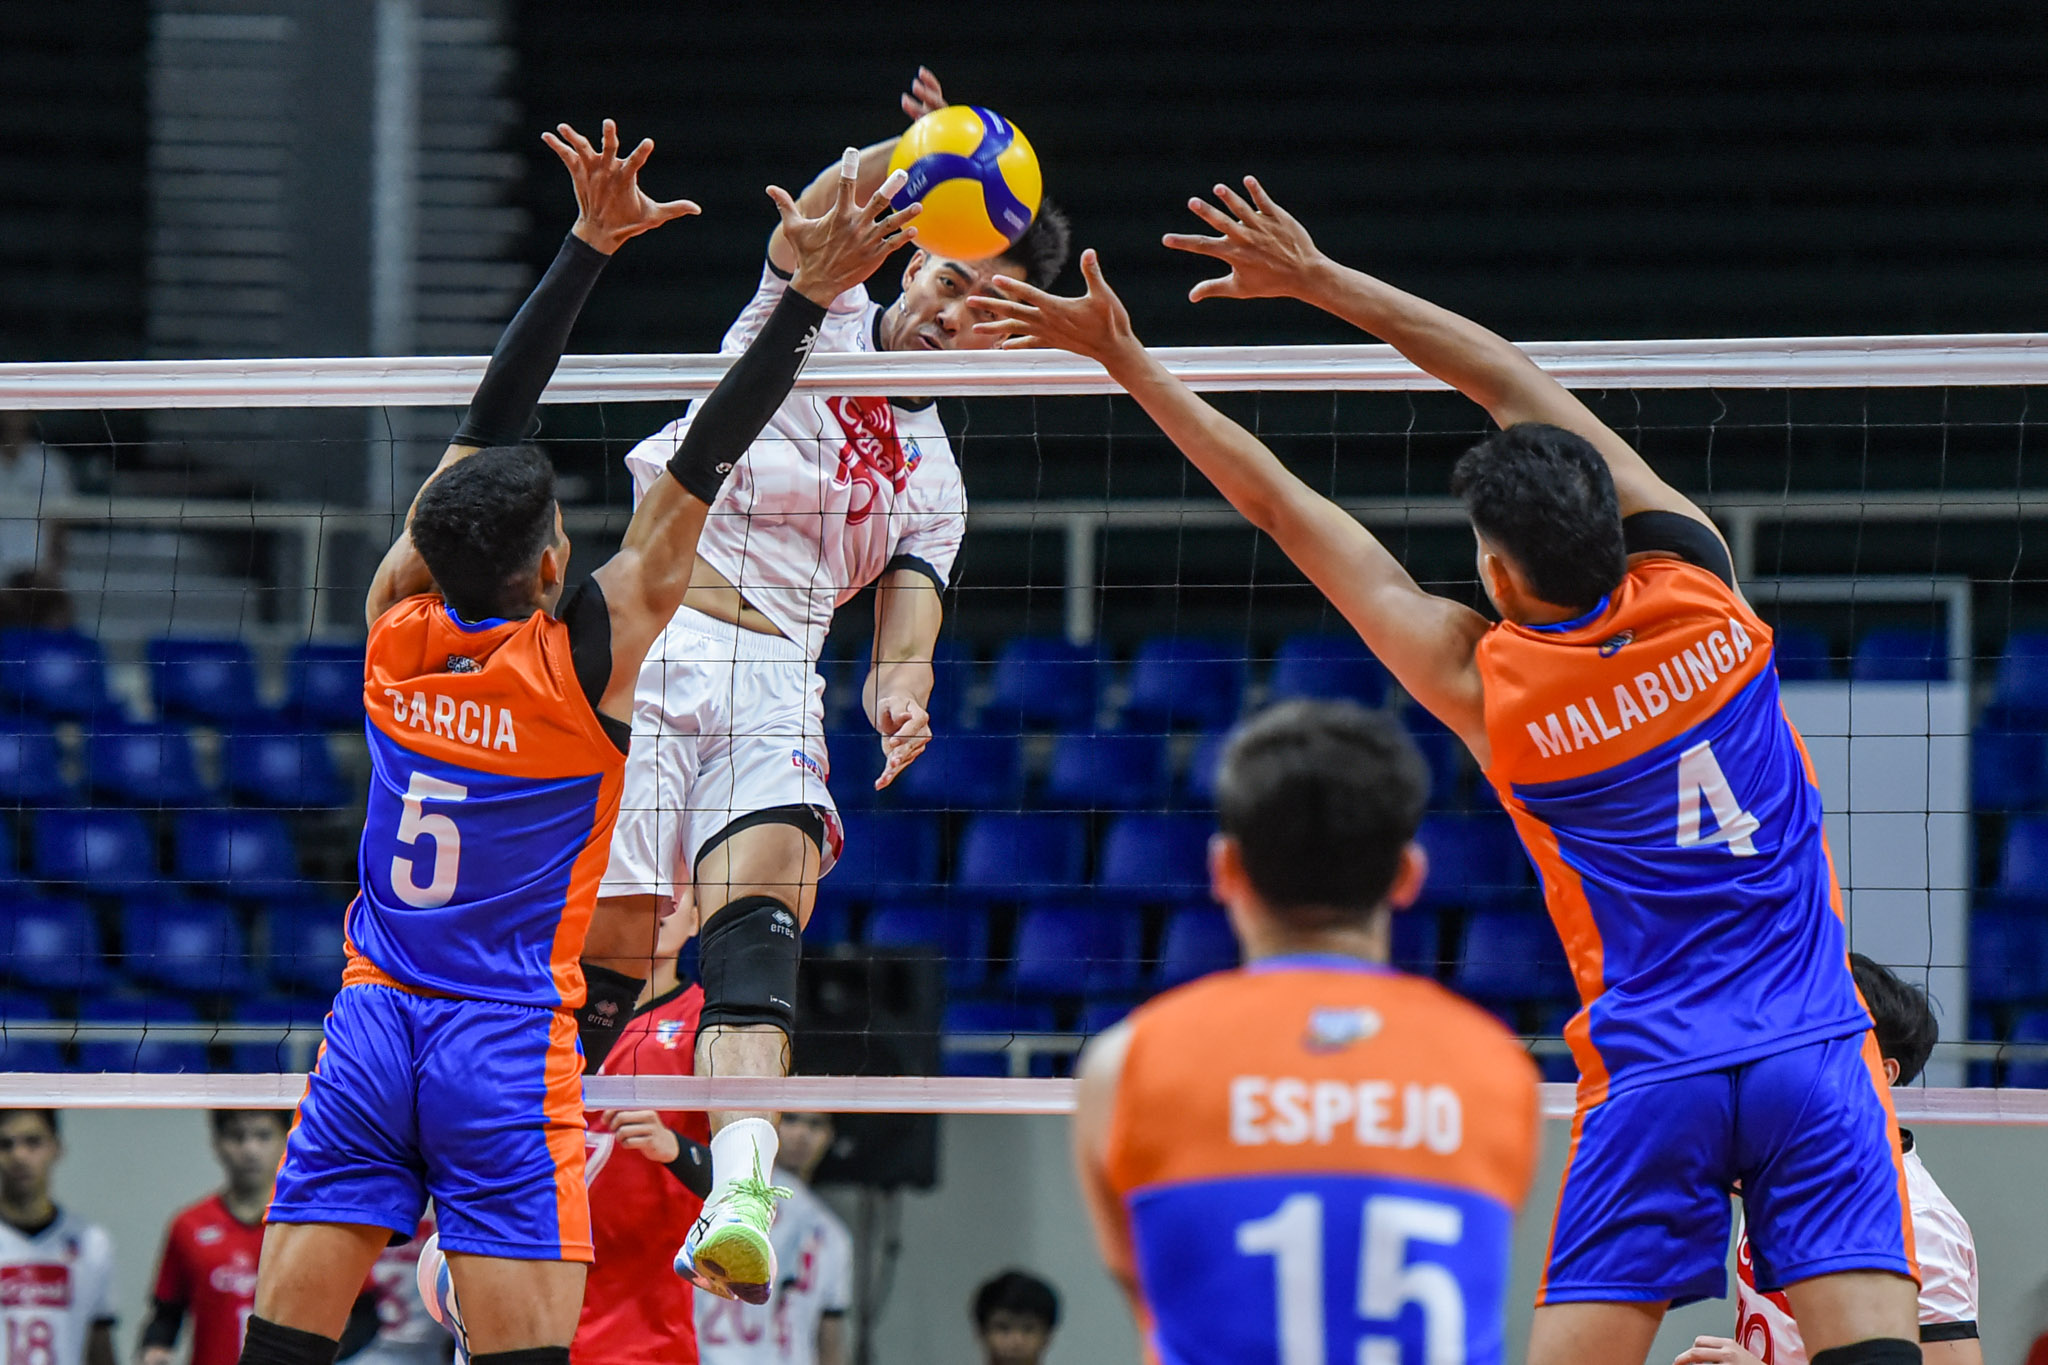 Cignal's Bryan Bagunas rises for a hit against Criss Cross defenders in the Spikers Turf Open Conference Finals